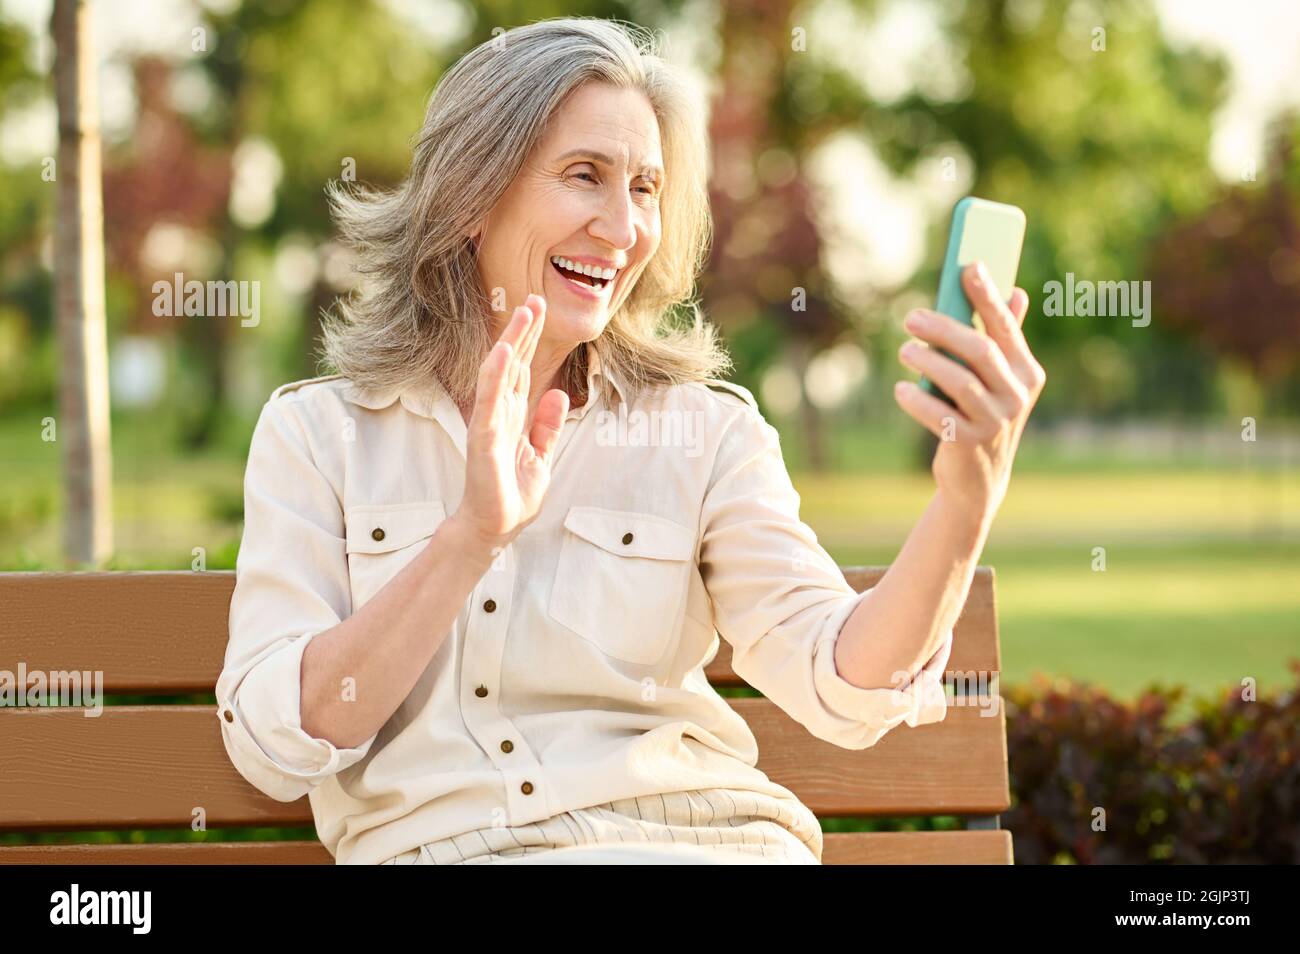 Woman friendly chatting by video call Stock Photo